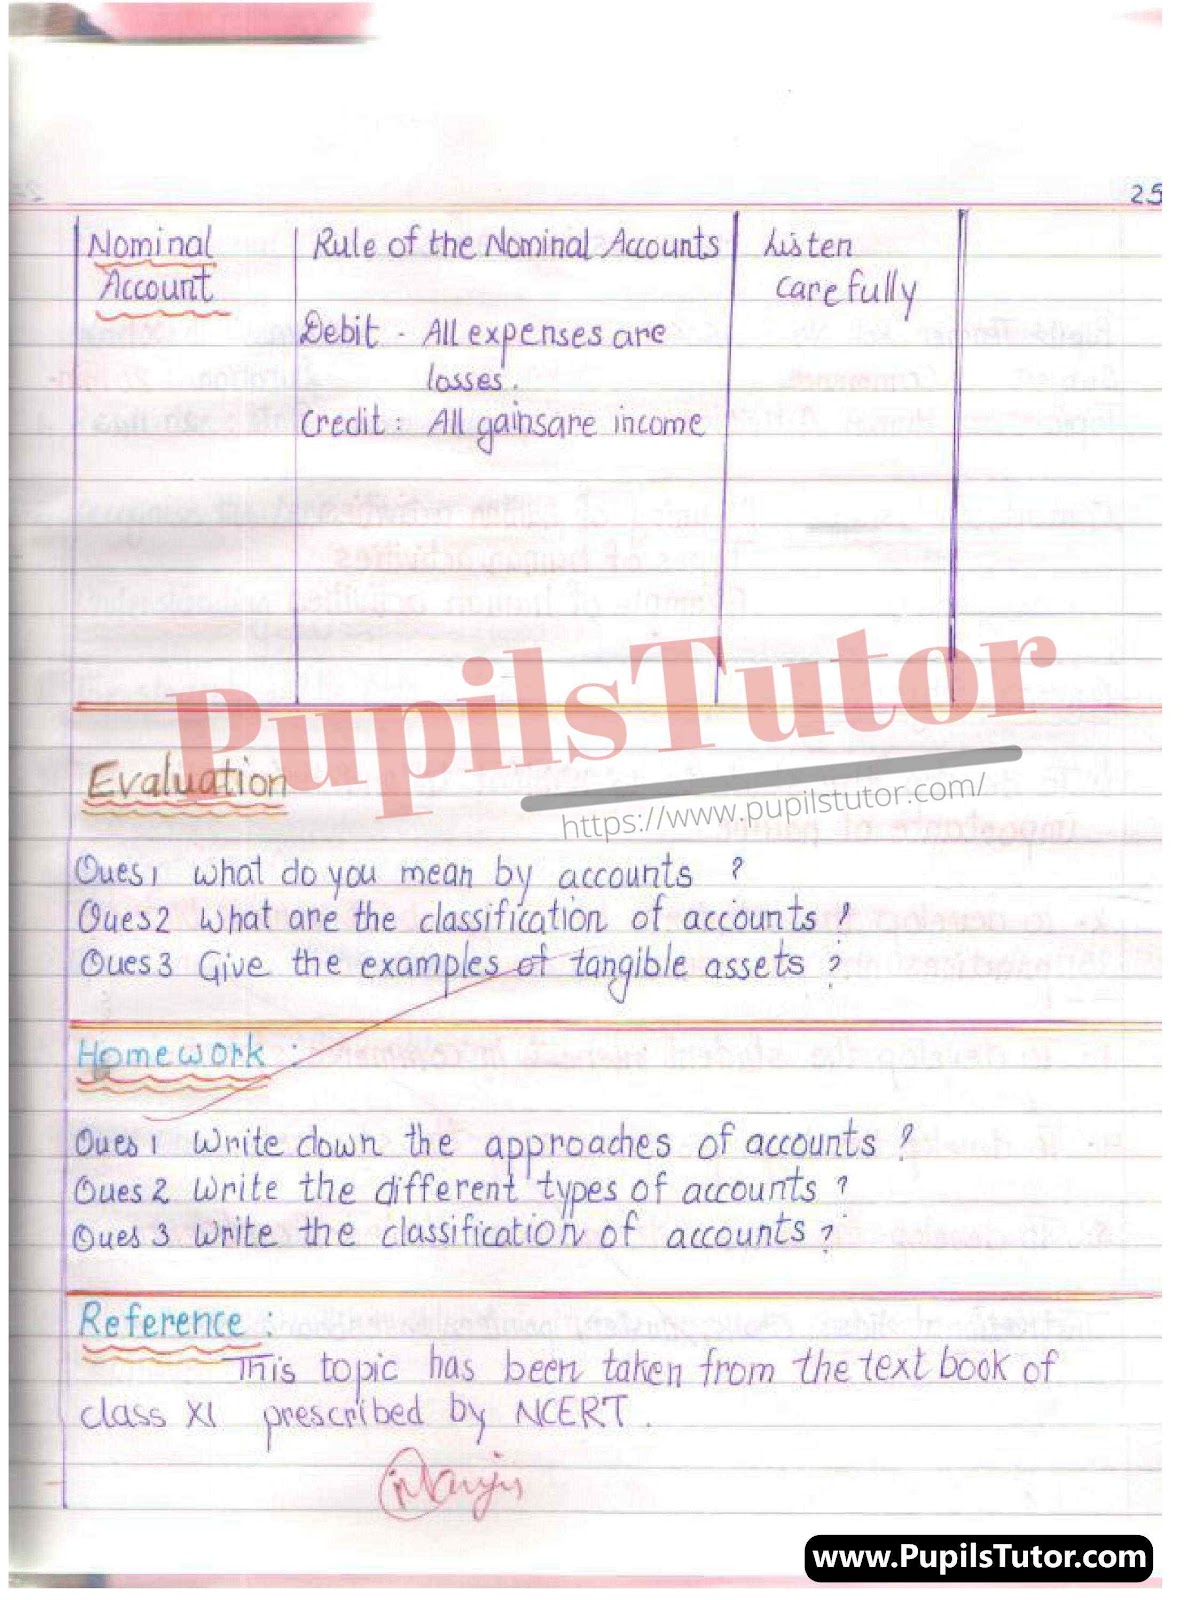 How To Make Mega Teaching Accounts Lesson Plan For Accounting (Commerce) Subject In English [Page And Image Number 7] – www.pupilstutor.com